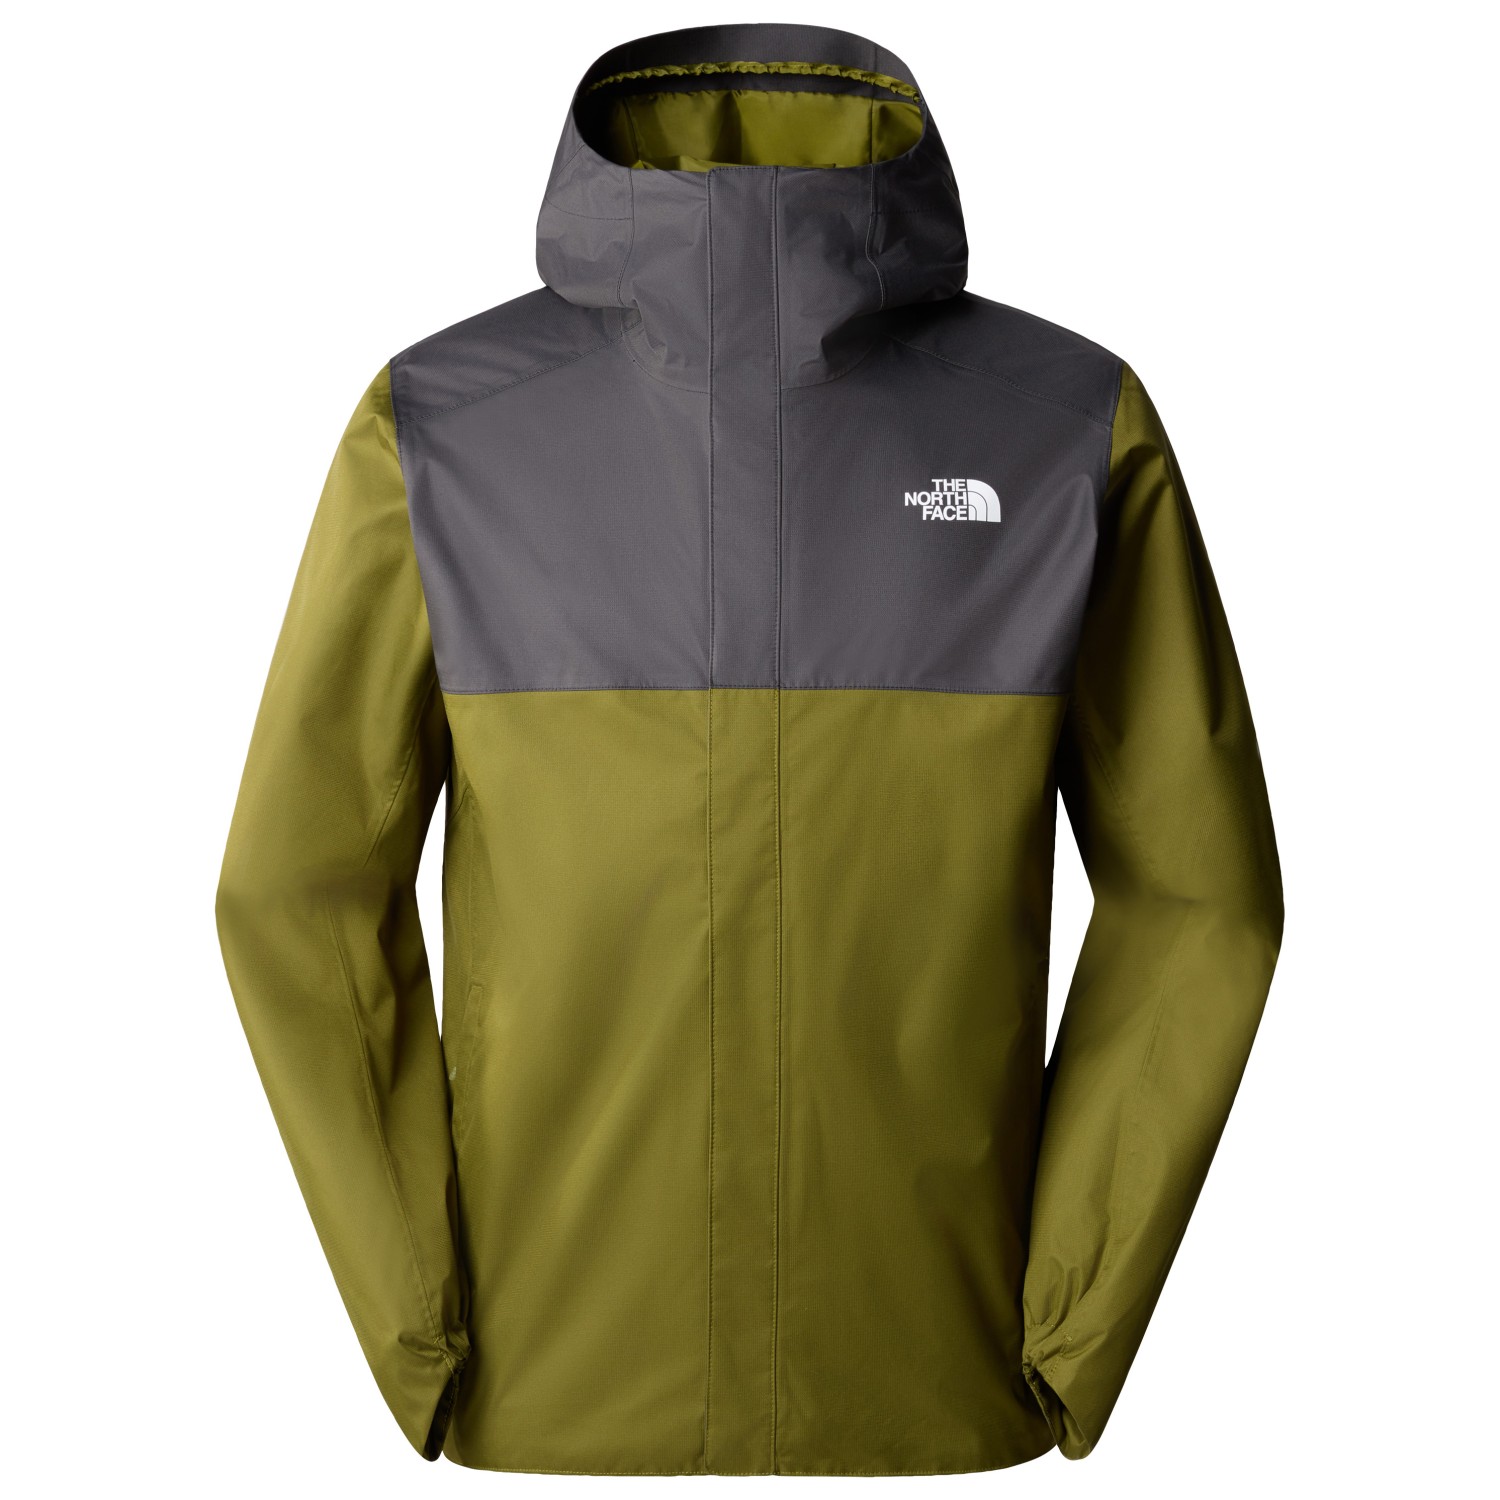 Дождевик The North Face Quest Zip In, цвет Forest Olive/Asphalt Grey куртка the north face quest insulated черный